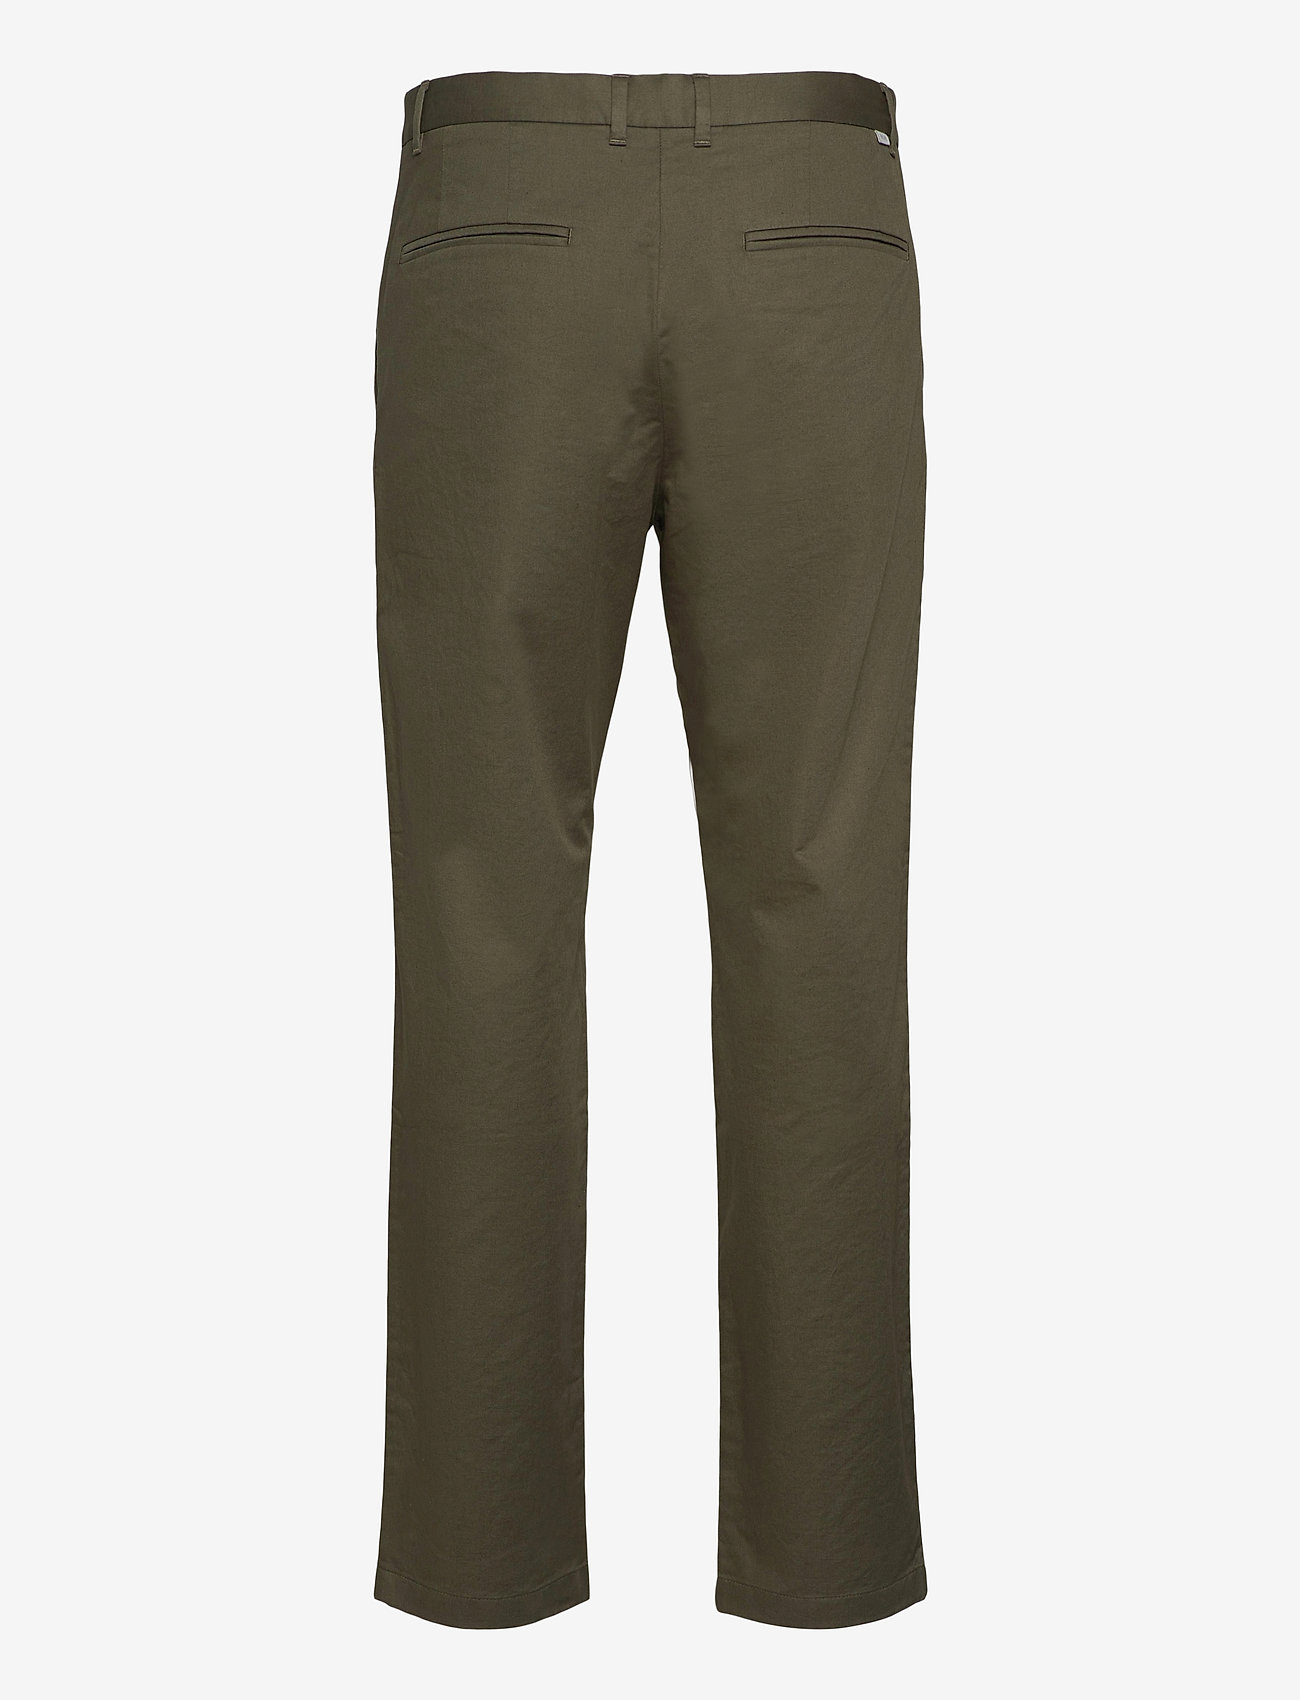 Wood Wood - Marcus light twill trousers - chinot - olive - 1